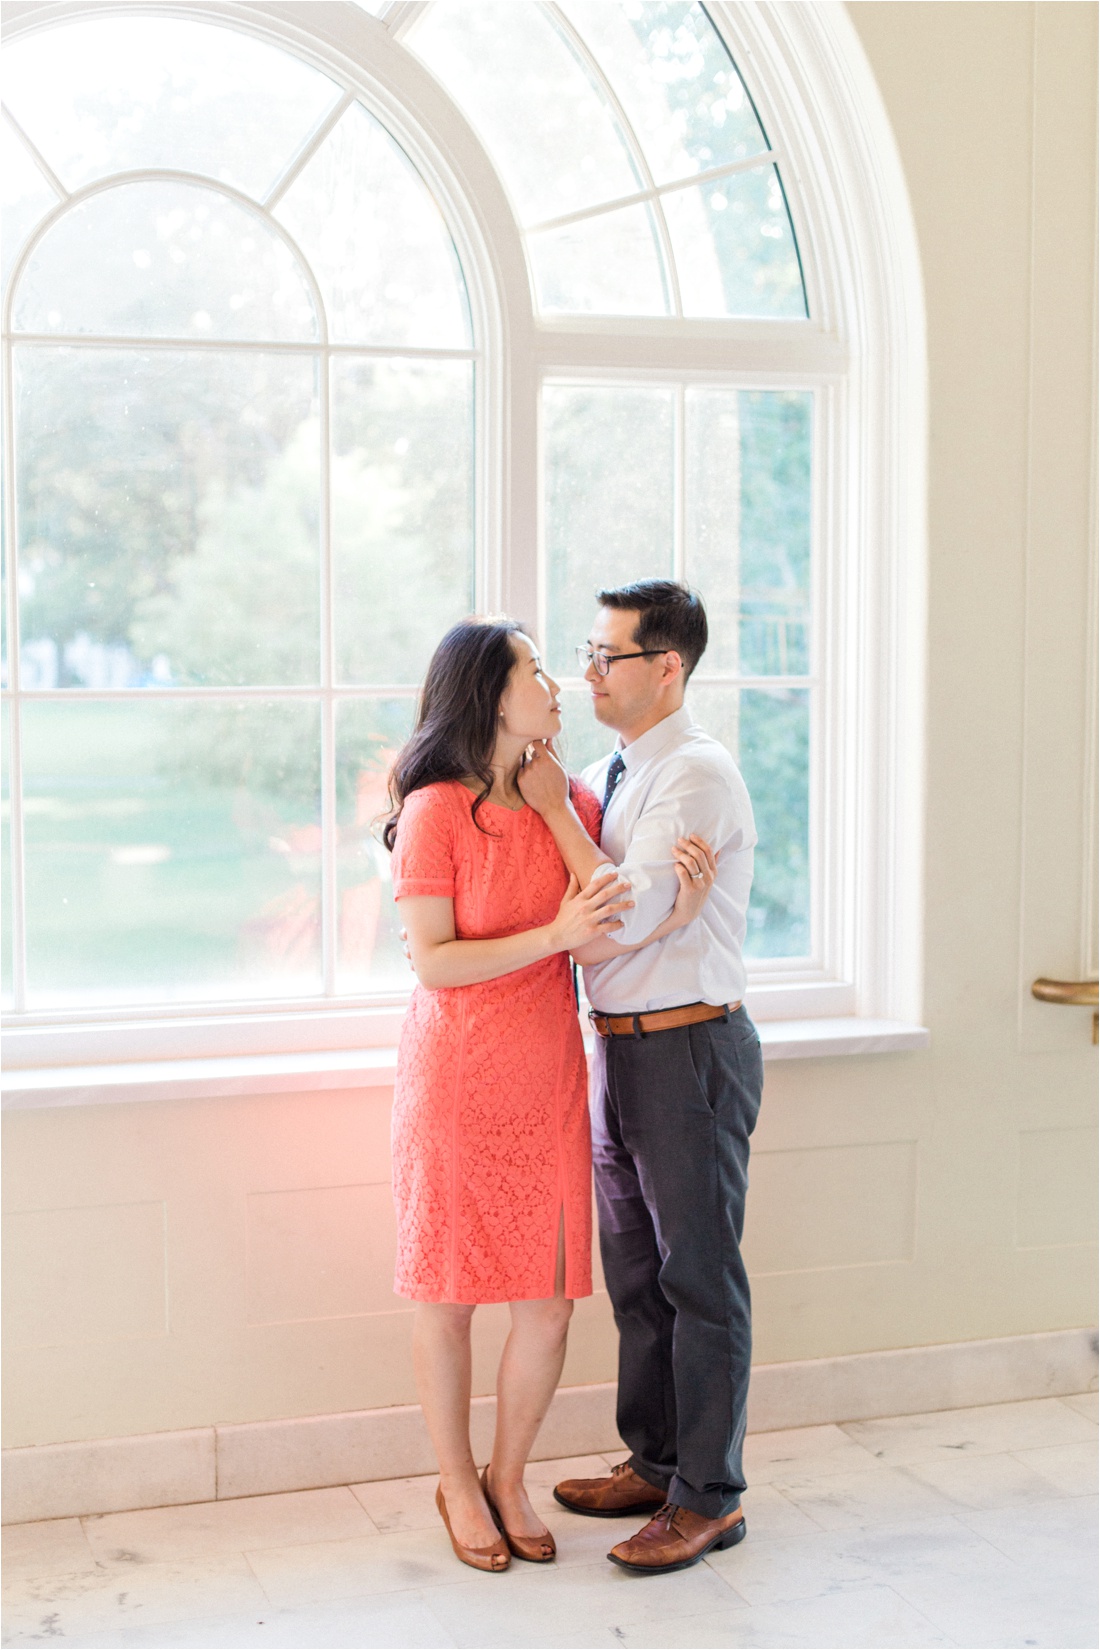 Fine Art, light and airy Engagement Session at Emory University's beautiful campus by Noble Sparrow Photography in Atlanta, Ga.